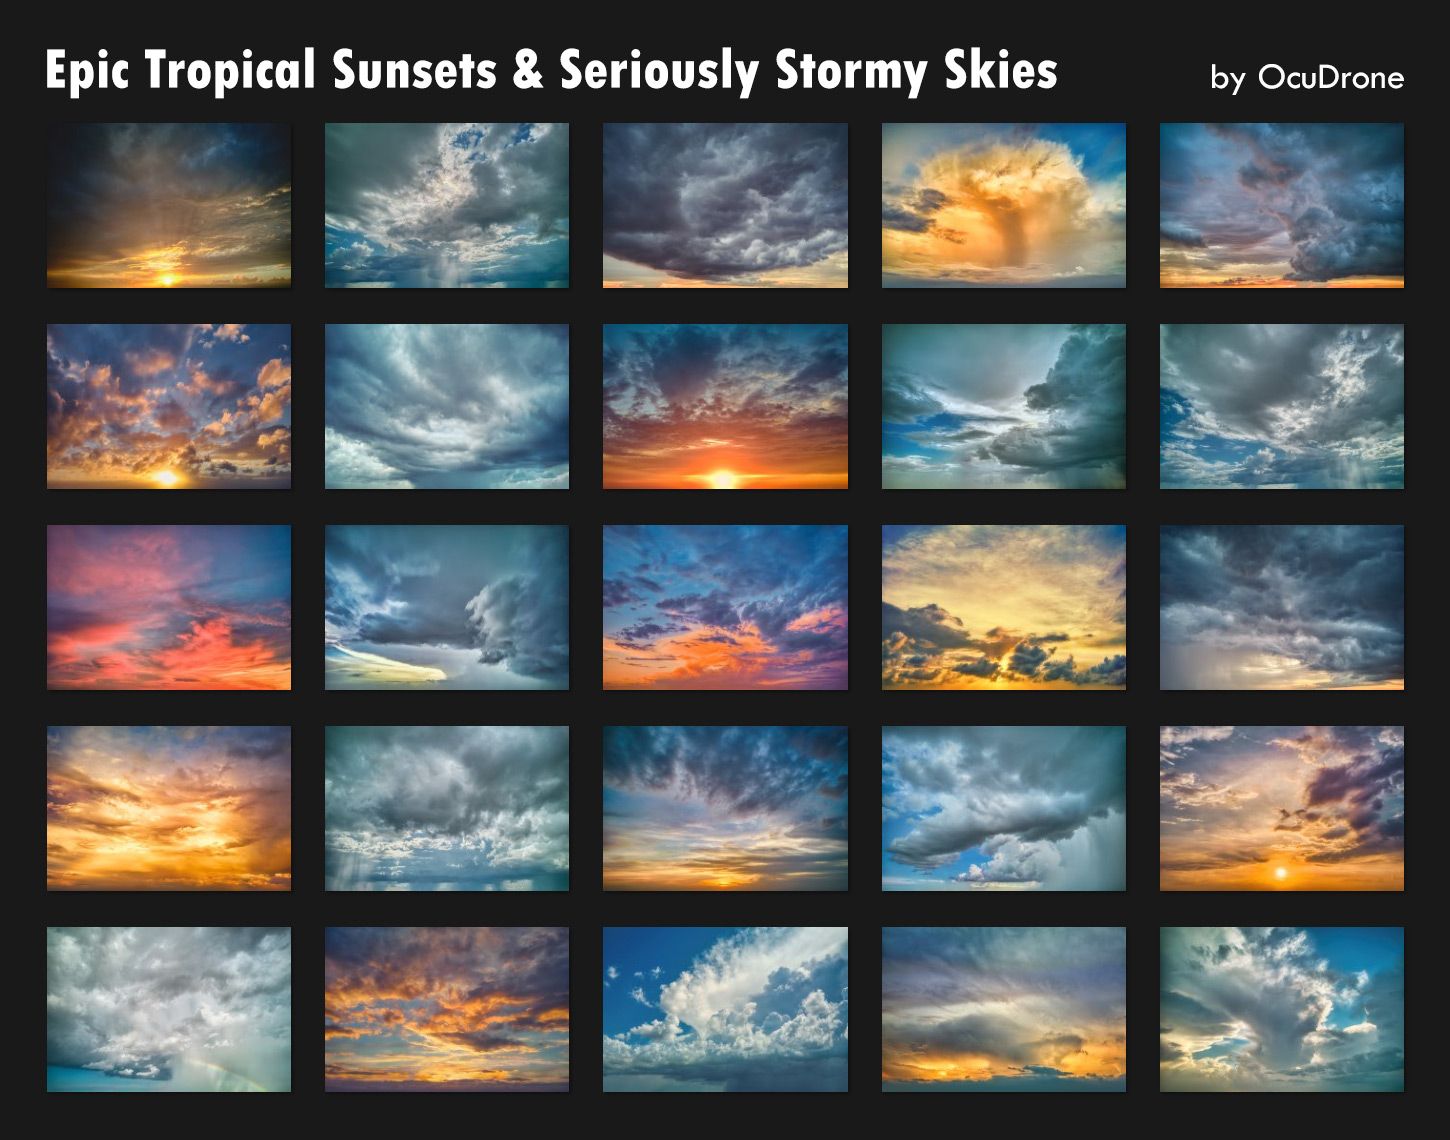 Epic Tropical Sunsets & Seriously Stormy Skies